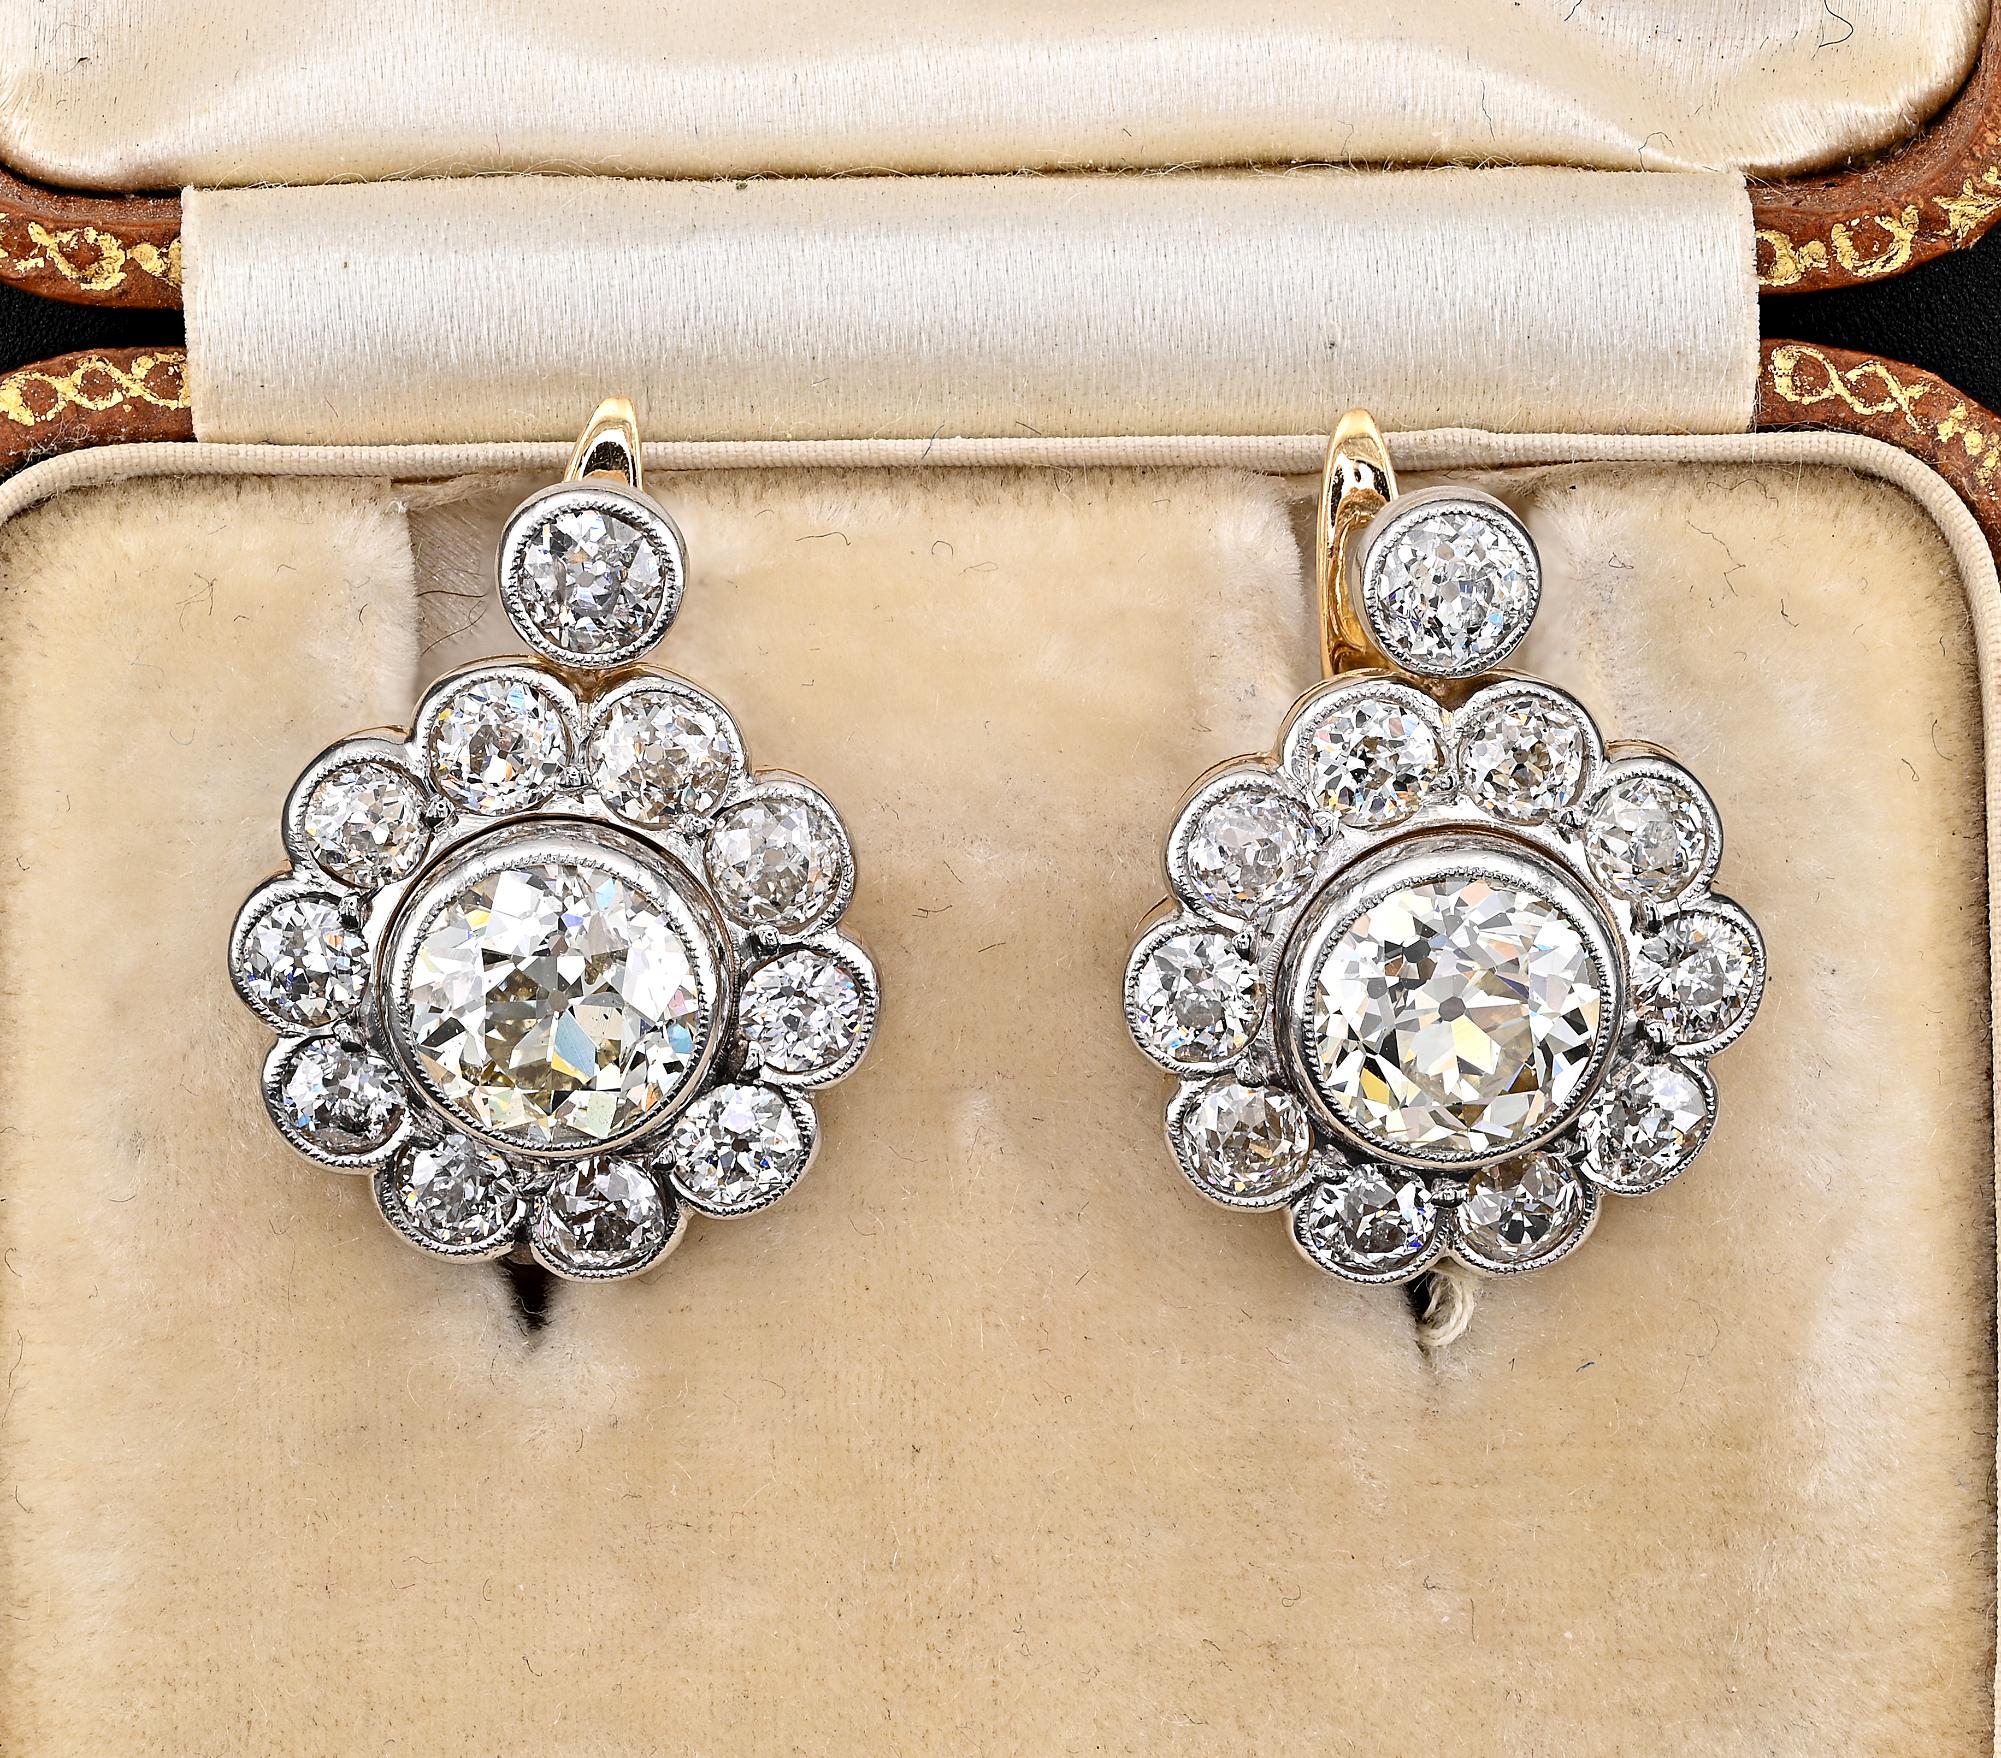 These superb pair of Edwardian period earrings are 1905 ca.
Marvelous original mount skilfully hand crafetd of solid 18 KT gold and Platinum
Modelled as classy Diamond Daisy clusters with a larger Diamond set in the middle, smaller Diamonds  in